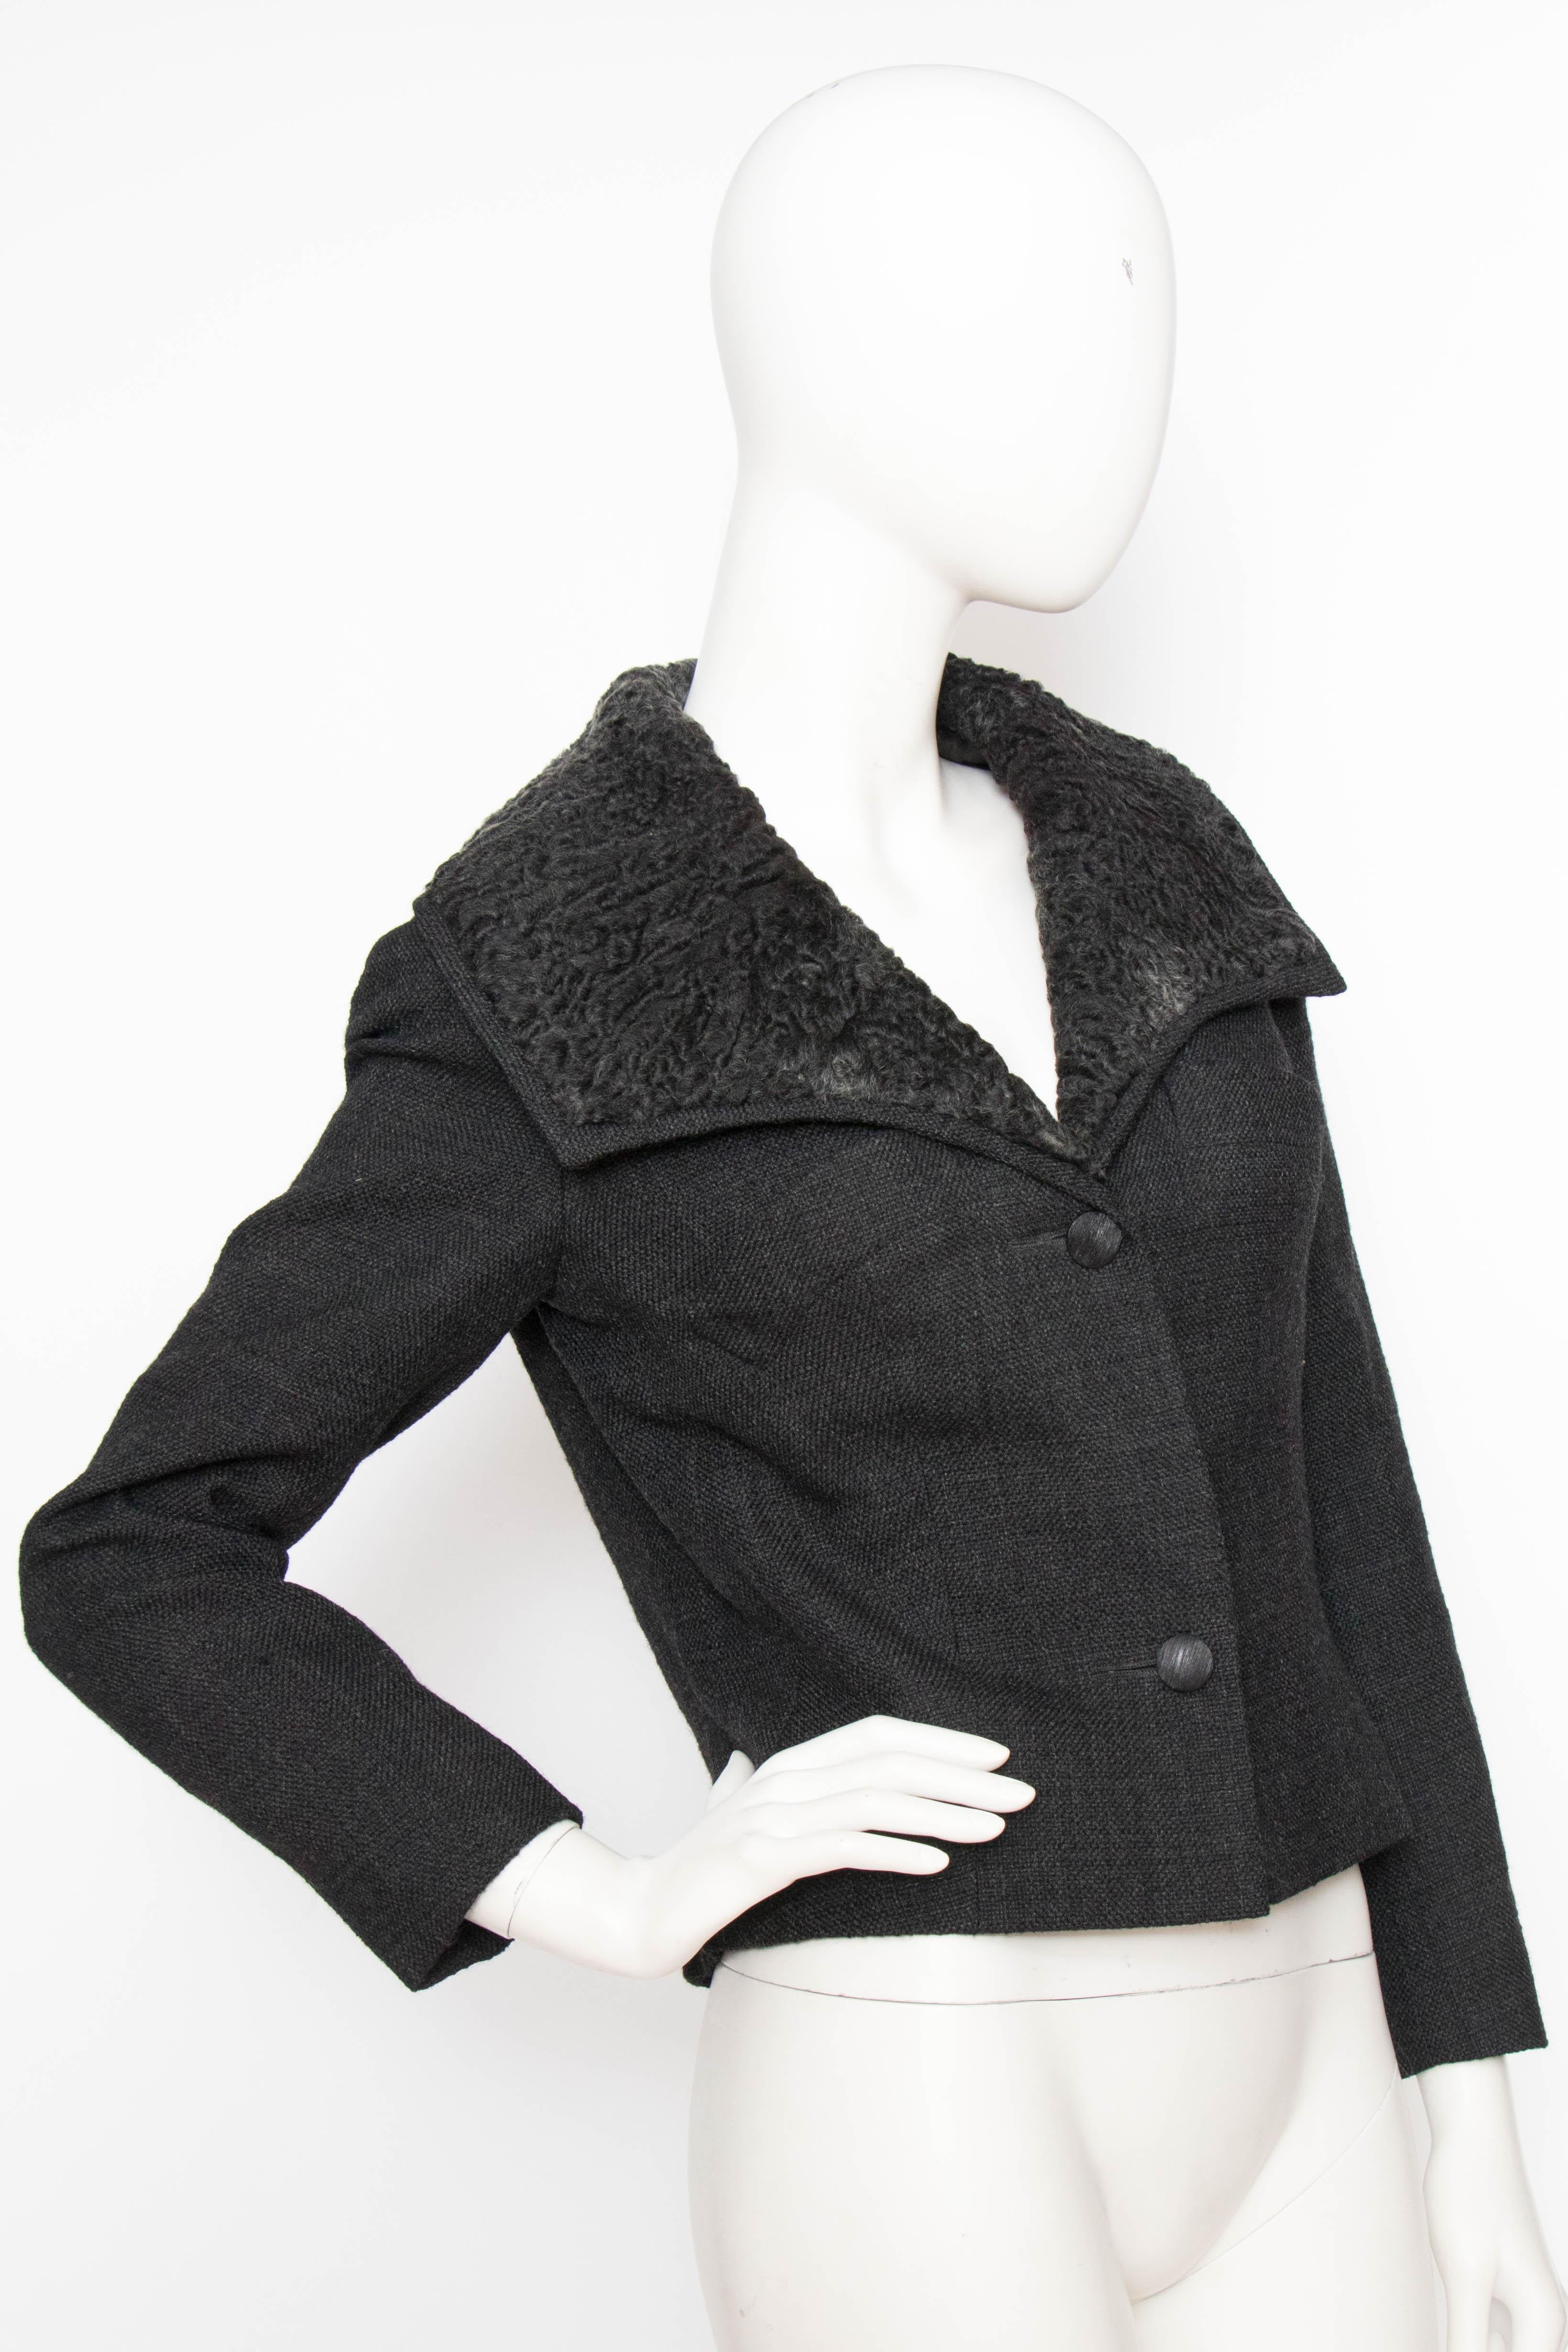 A 1950s cropped Christian Dior wool jacket with an elegant v-neckline, front-buttoned closure and fur-trimmed collar. The jacket is slightly nipped at the waist and has beautiful couture-style dart and seam work. The jacket is fully lined.

The size